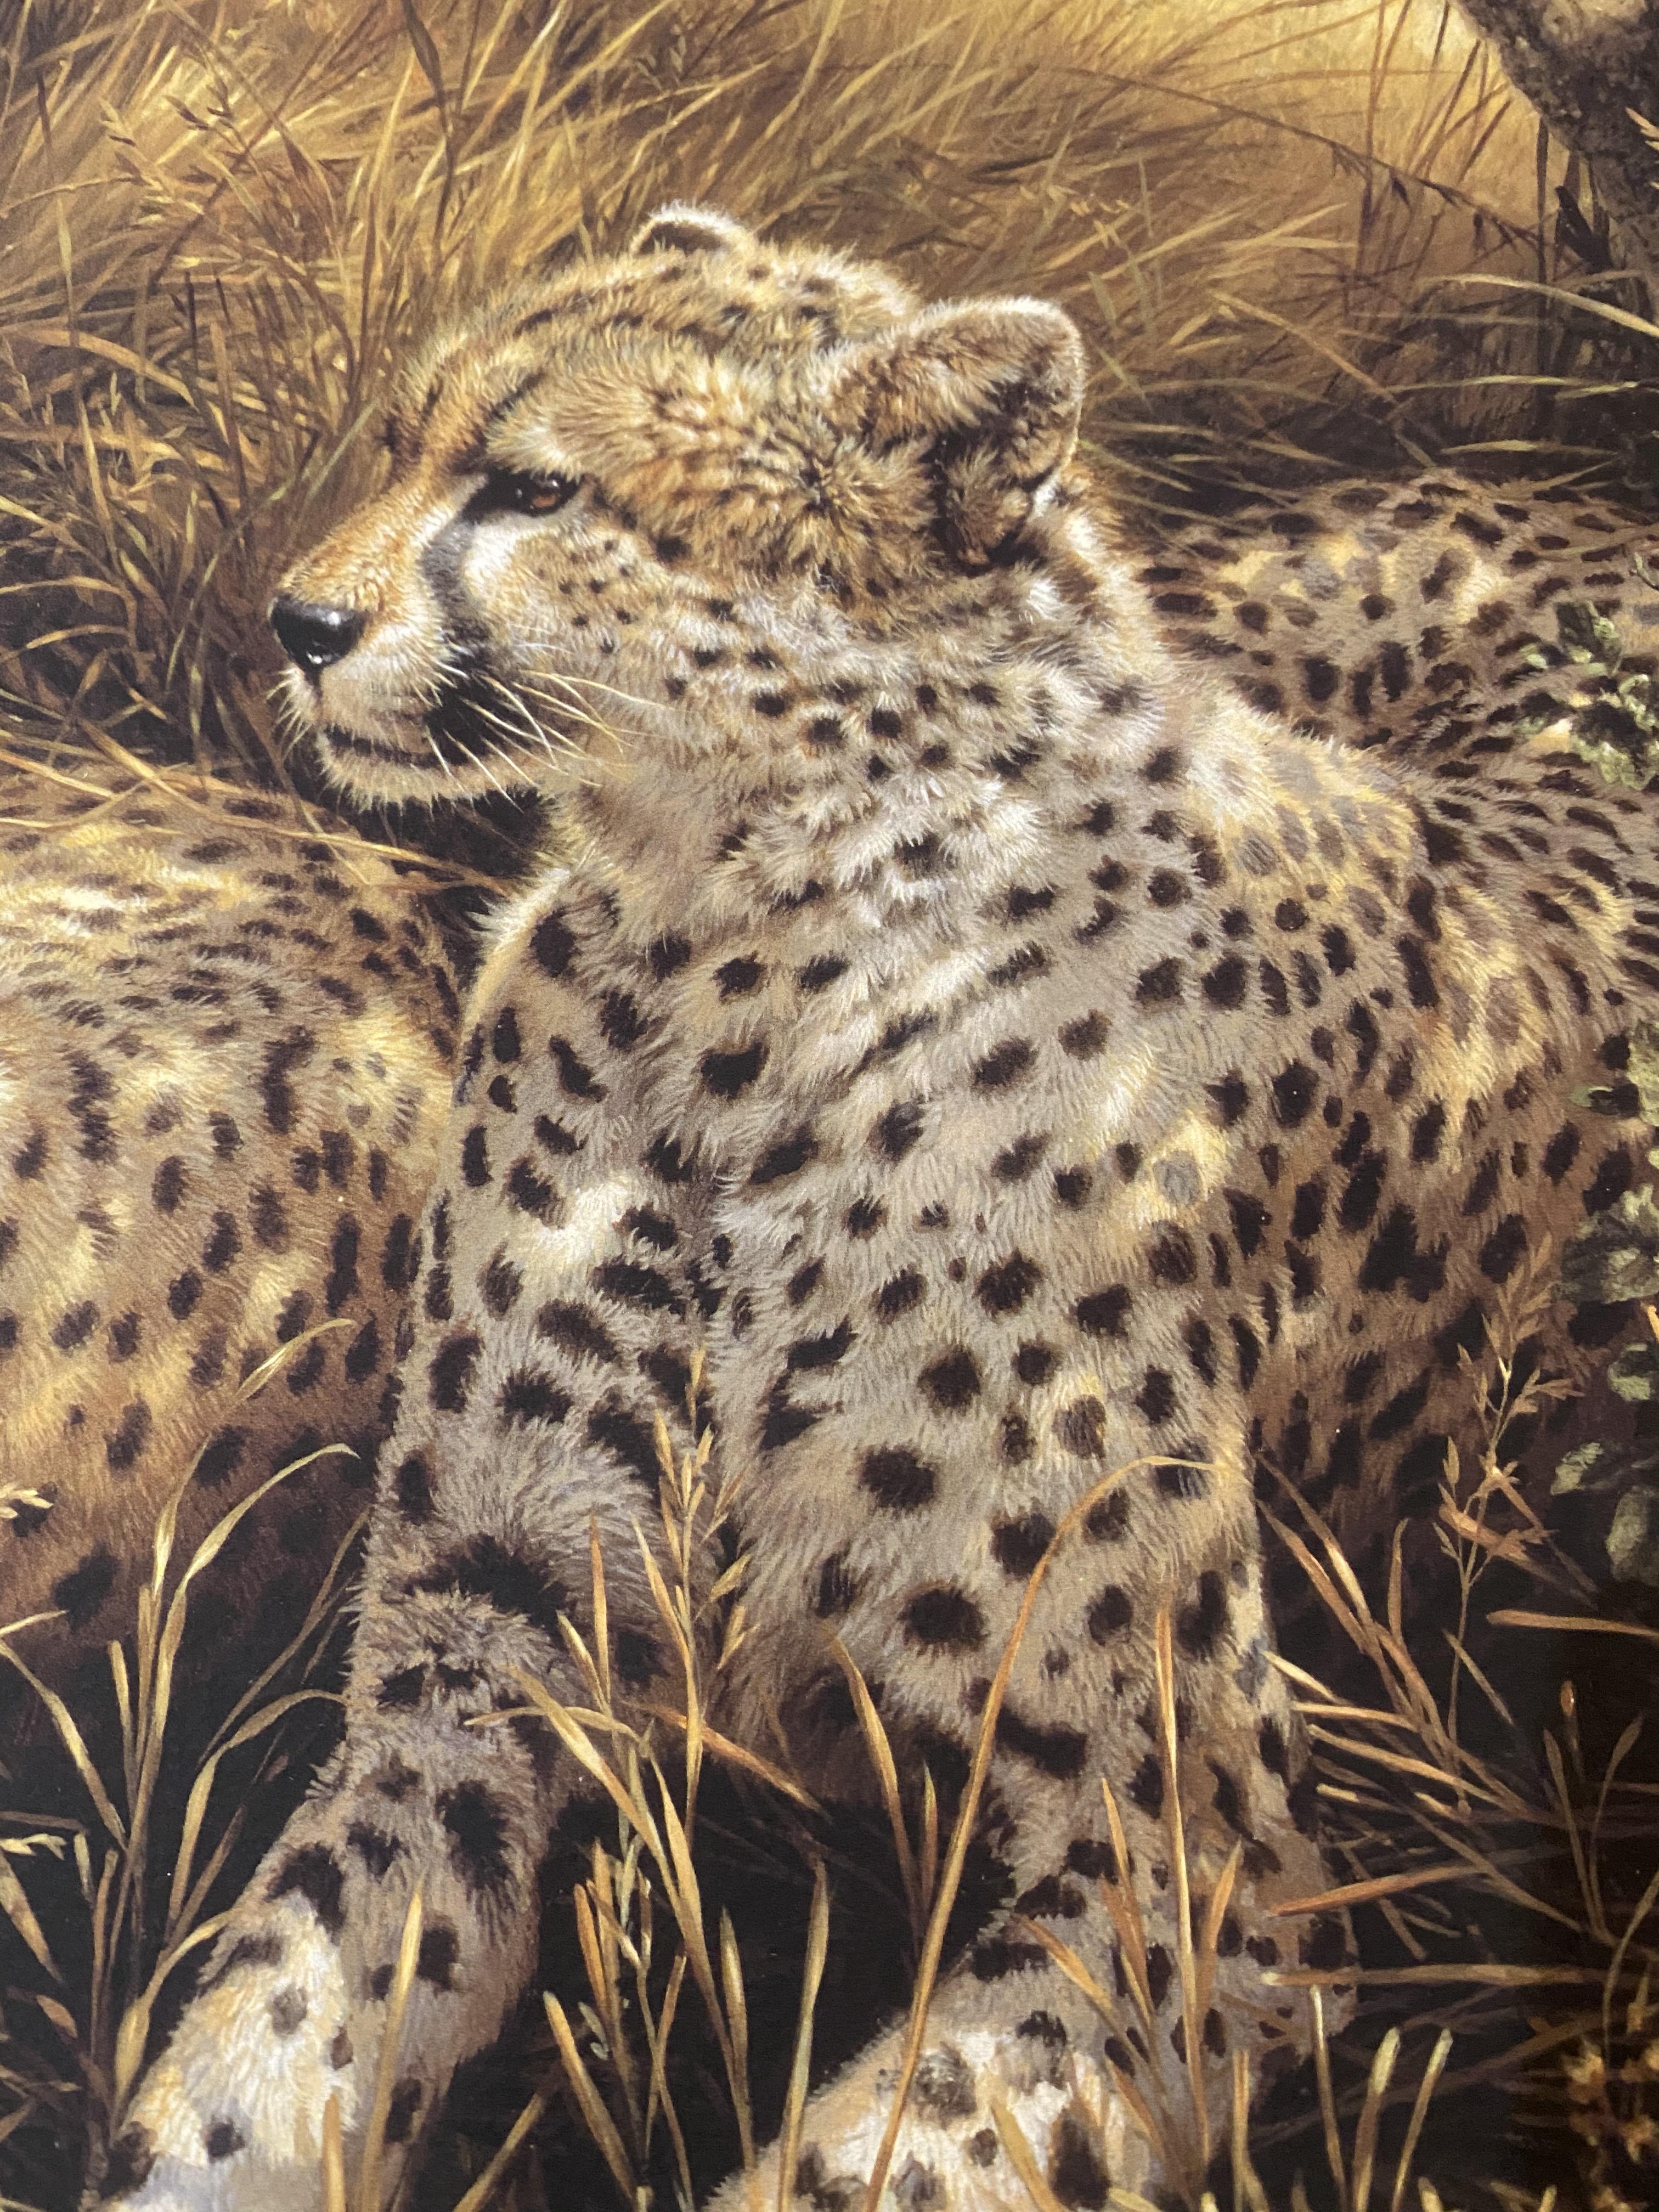 Michael Jackson Signed Limited Edition Print 'Cheetahs' With C.O.A. - Image 6 of 7